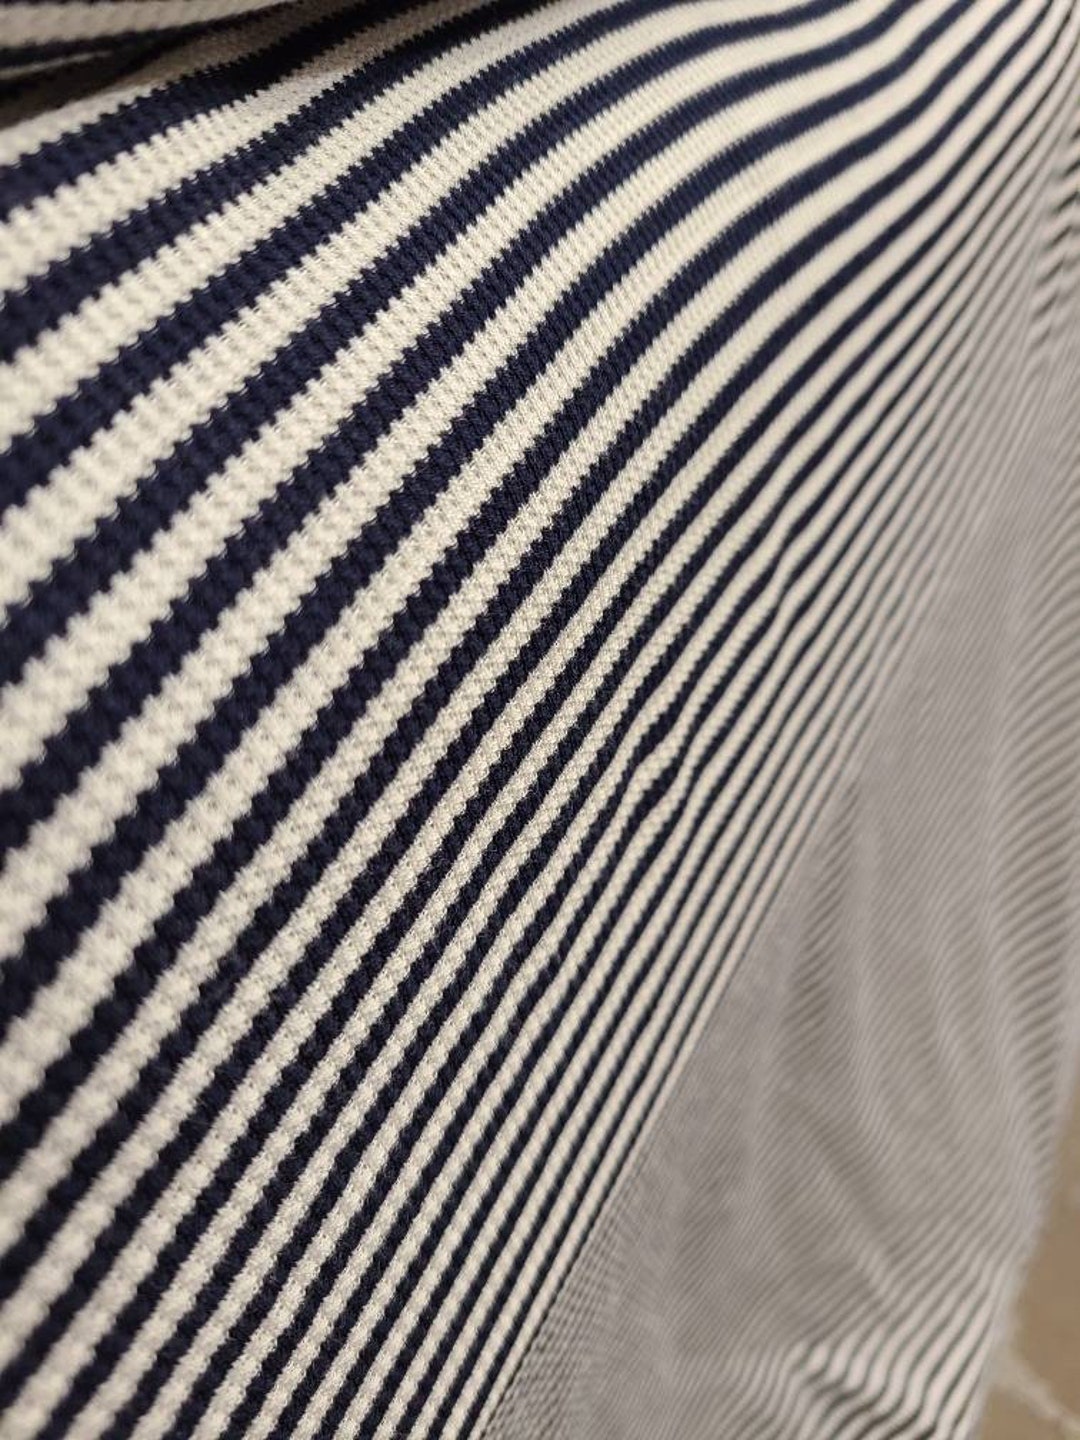 Rayon Spandex Waffle Weave Thermal navy/white by the Yard - Etsy